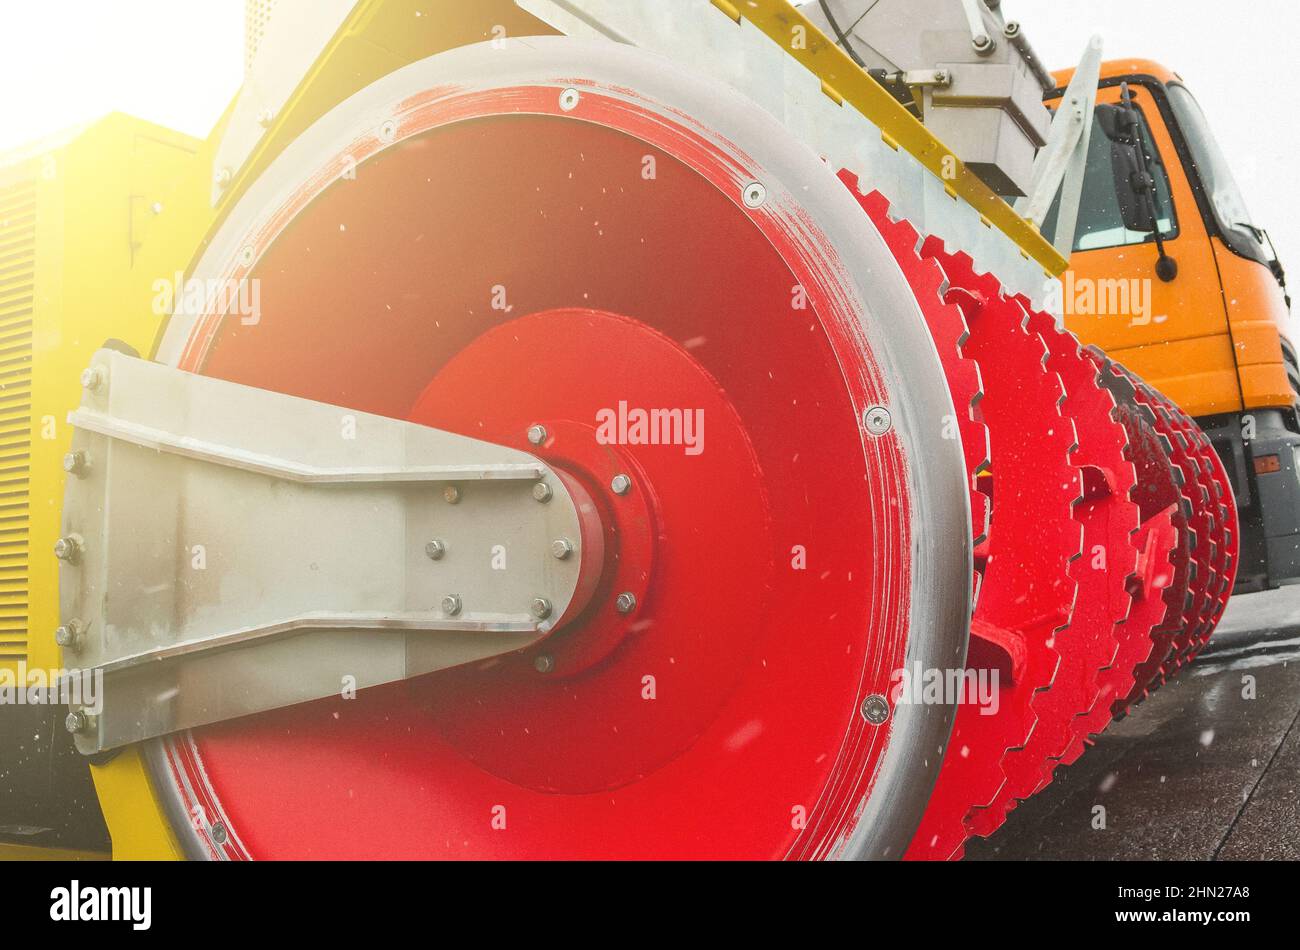 Snow-removing machine, view of the mechanism close-up Stock Photo